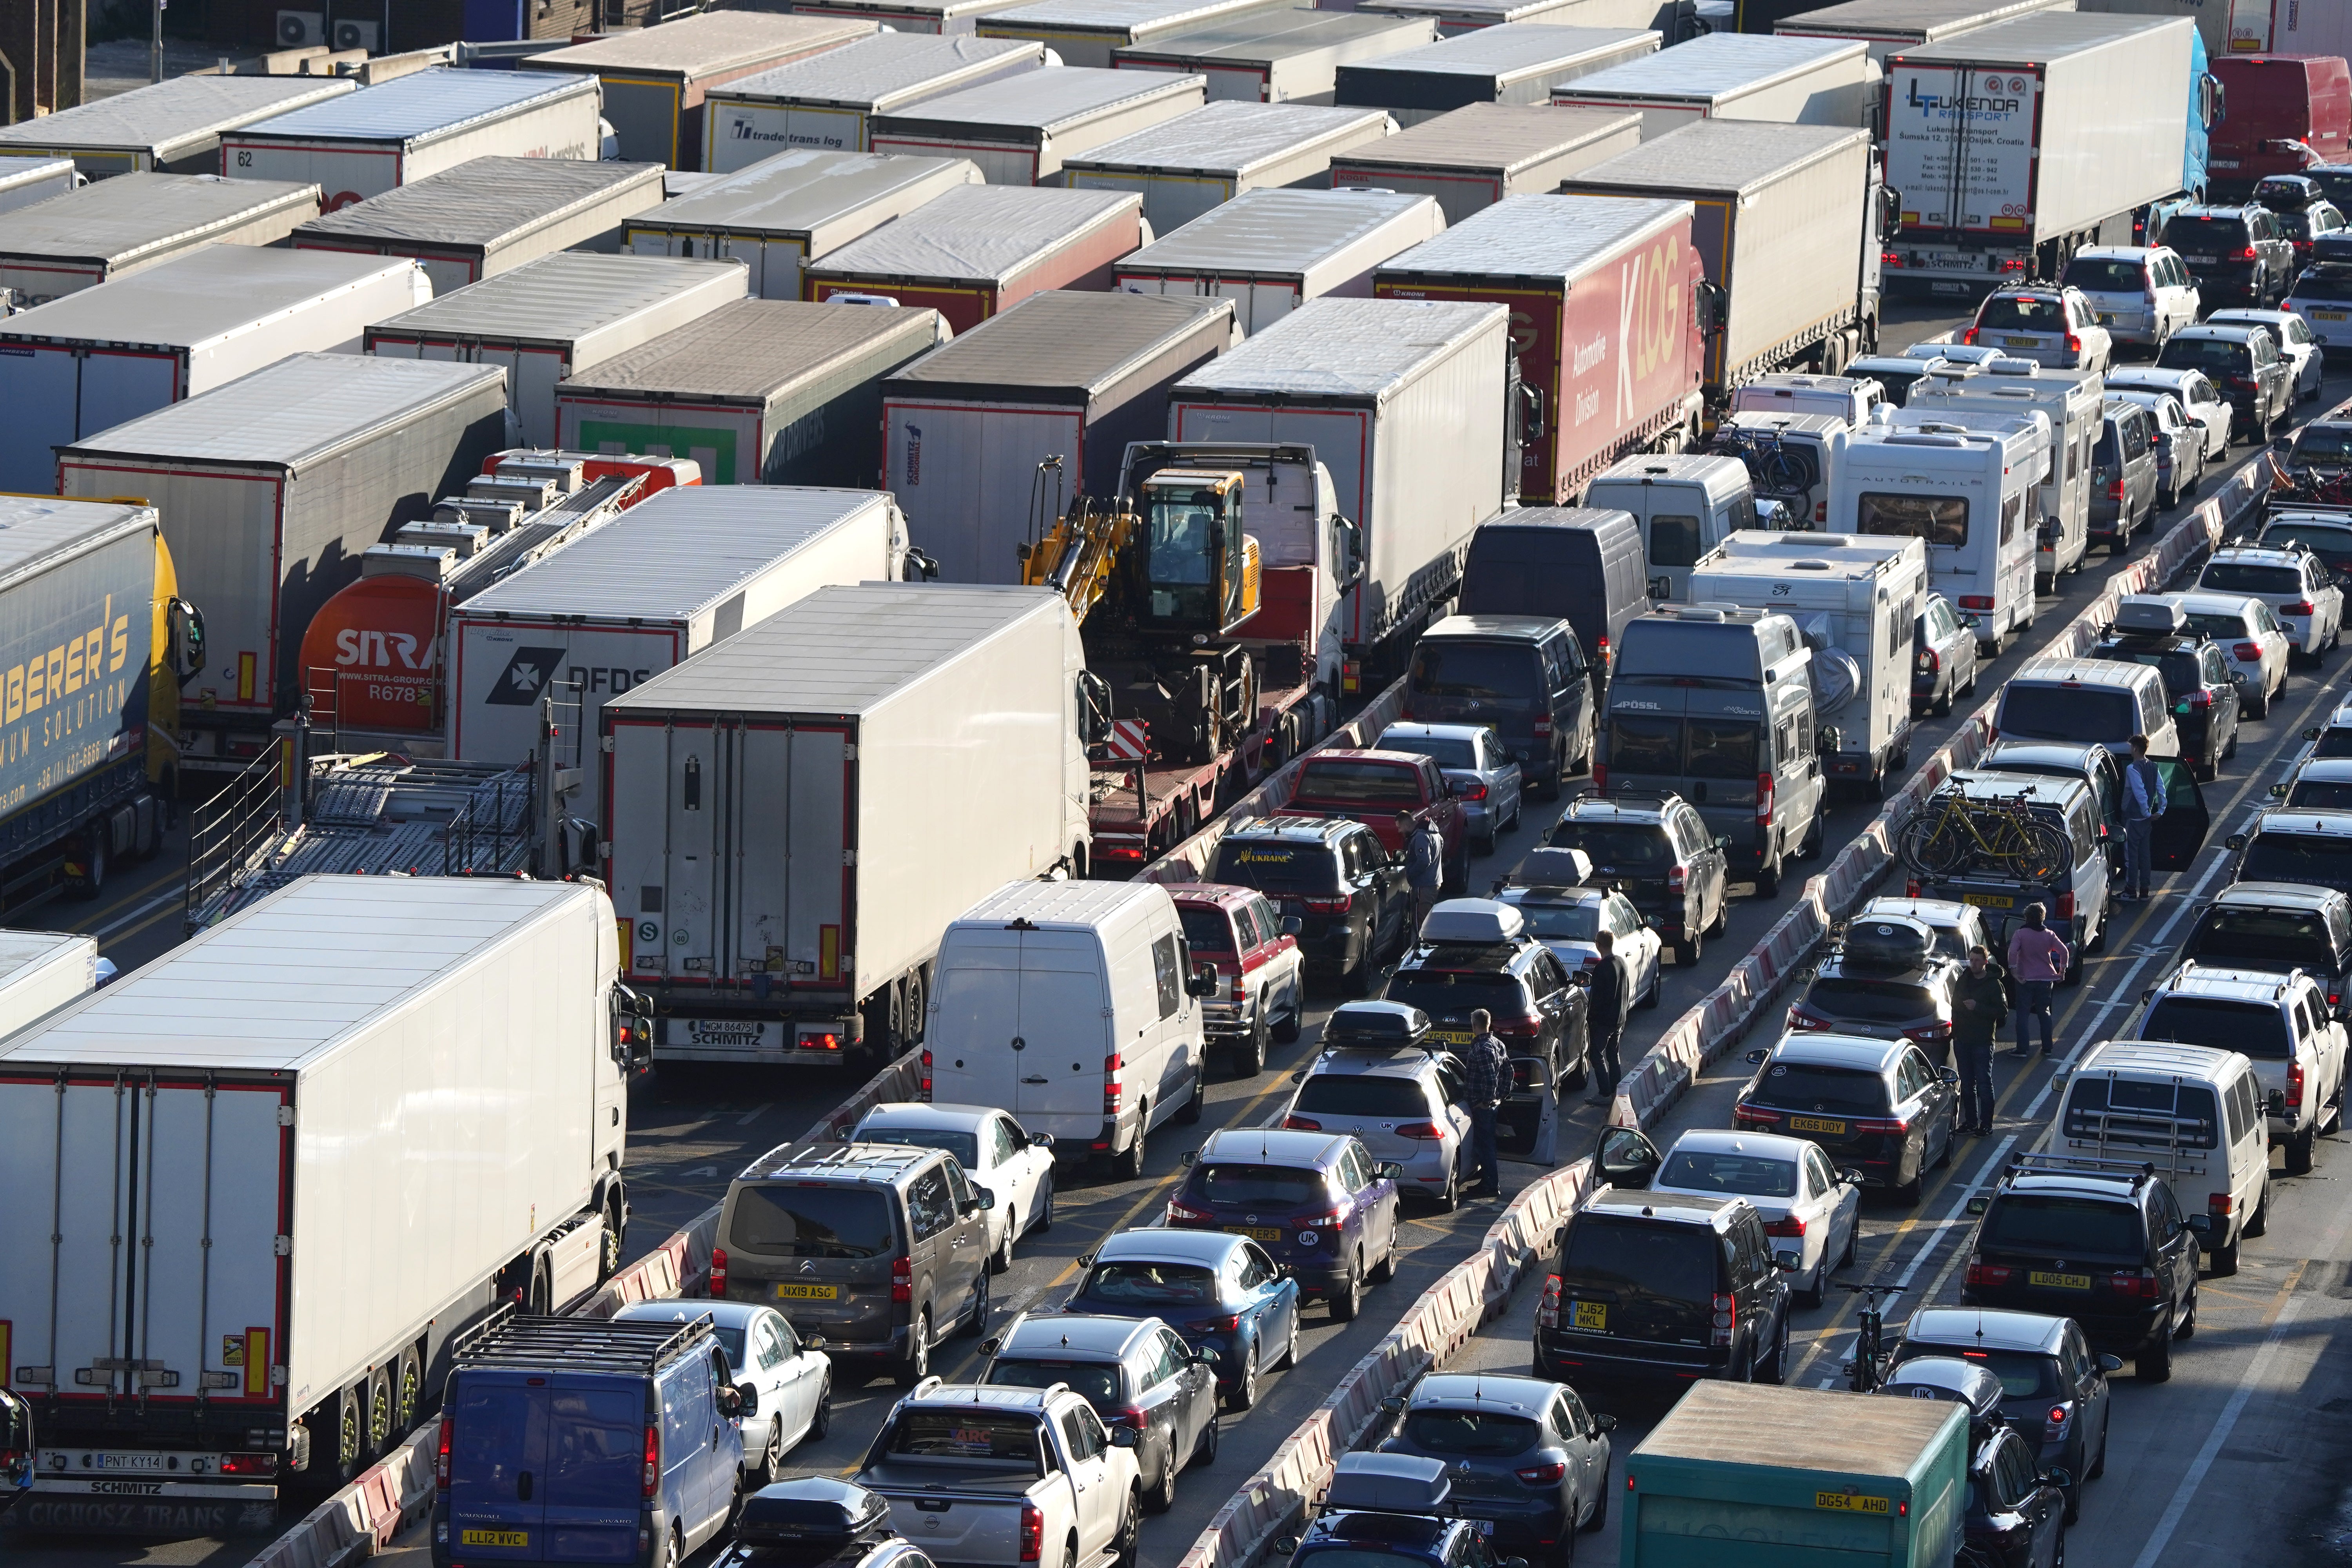 Dover has seen congestion impacting travel and food sector